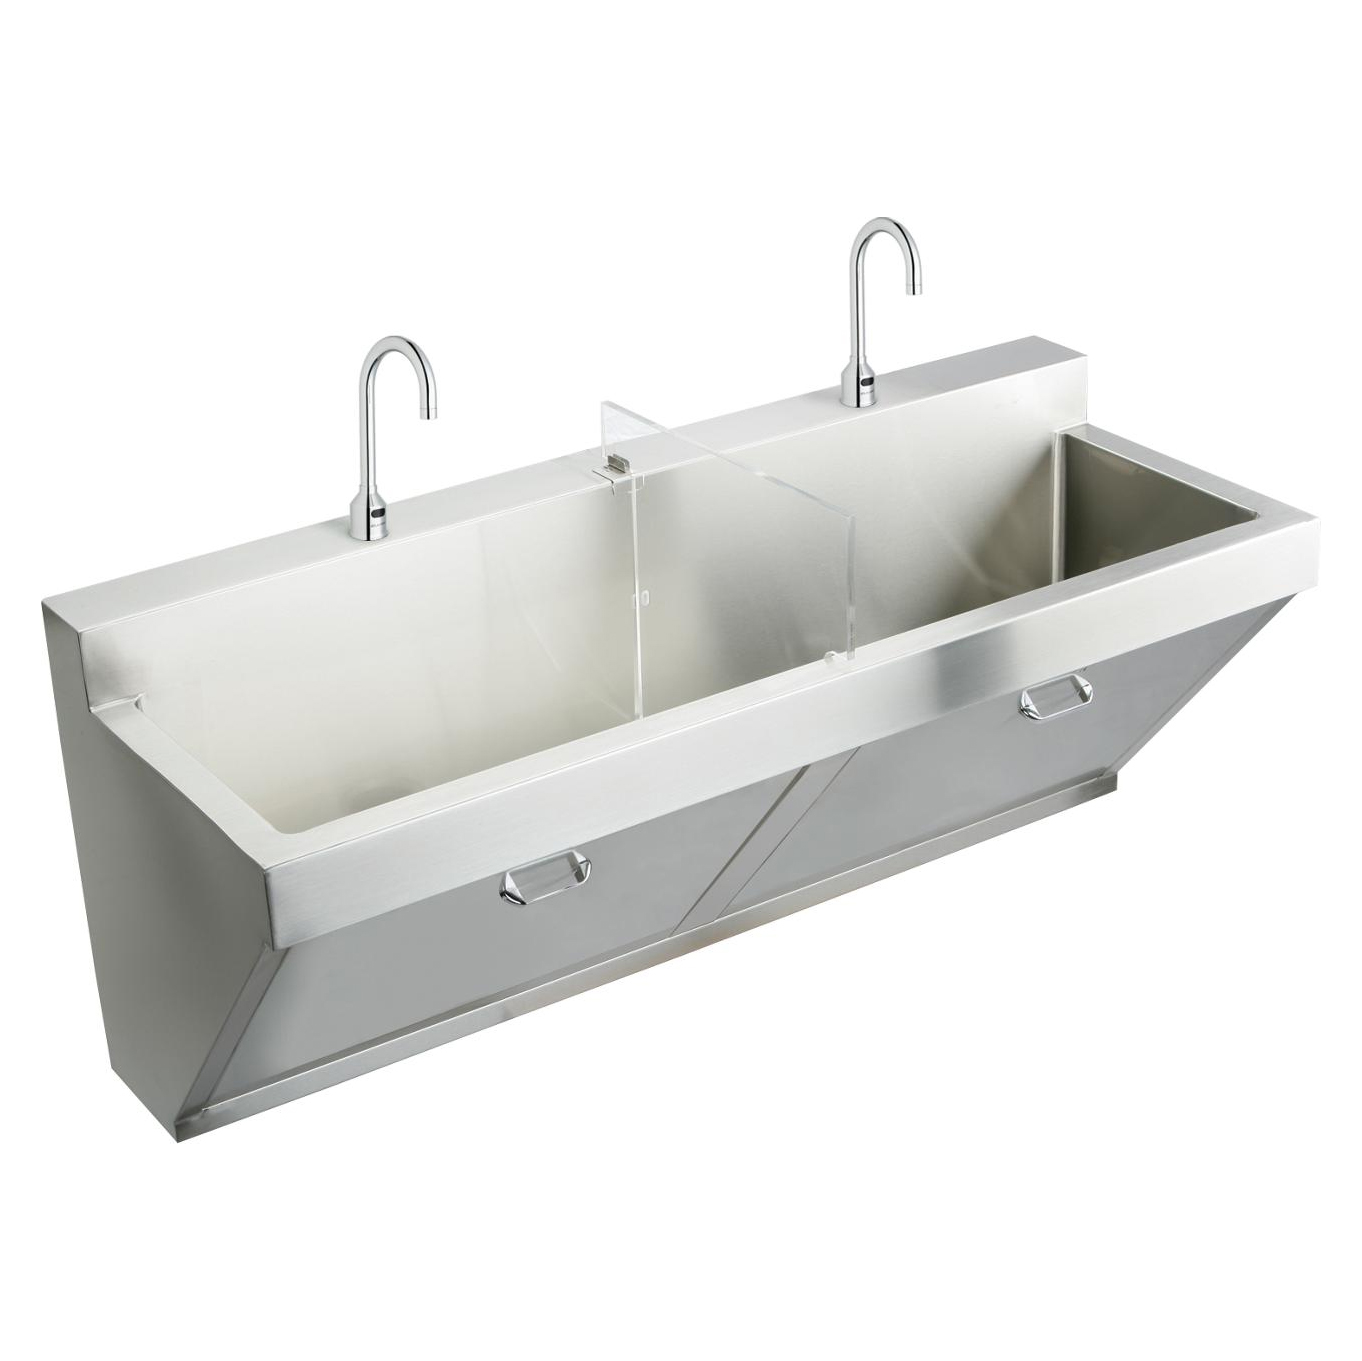 Stainless Steel 60x23" Wall Hung Double Bowl Surgeon Scrub Sink Kit